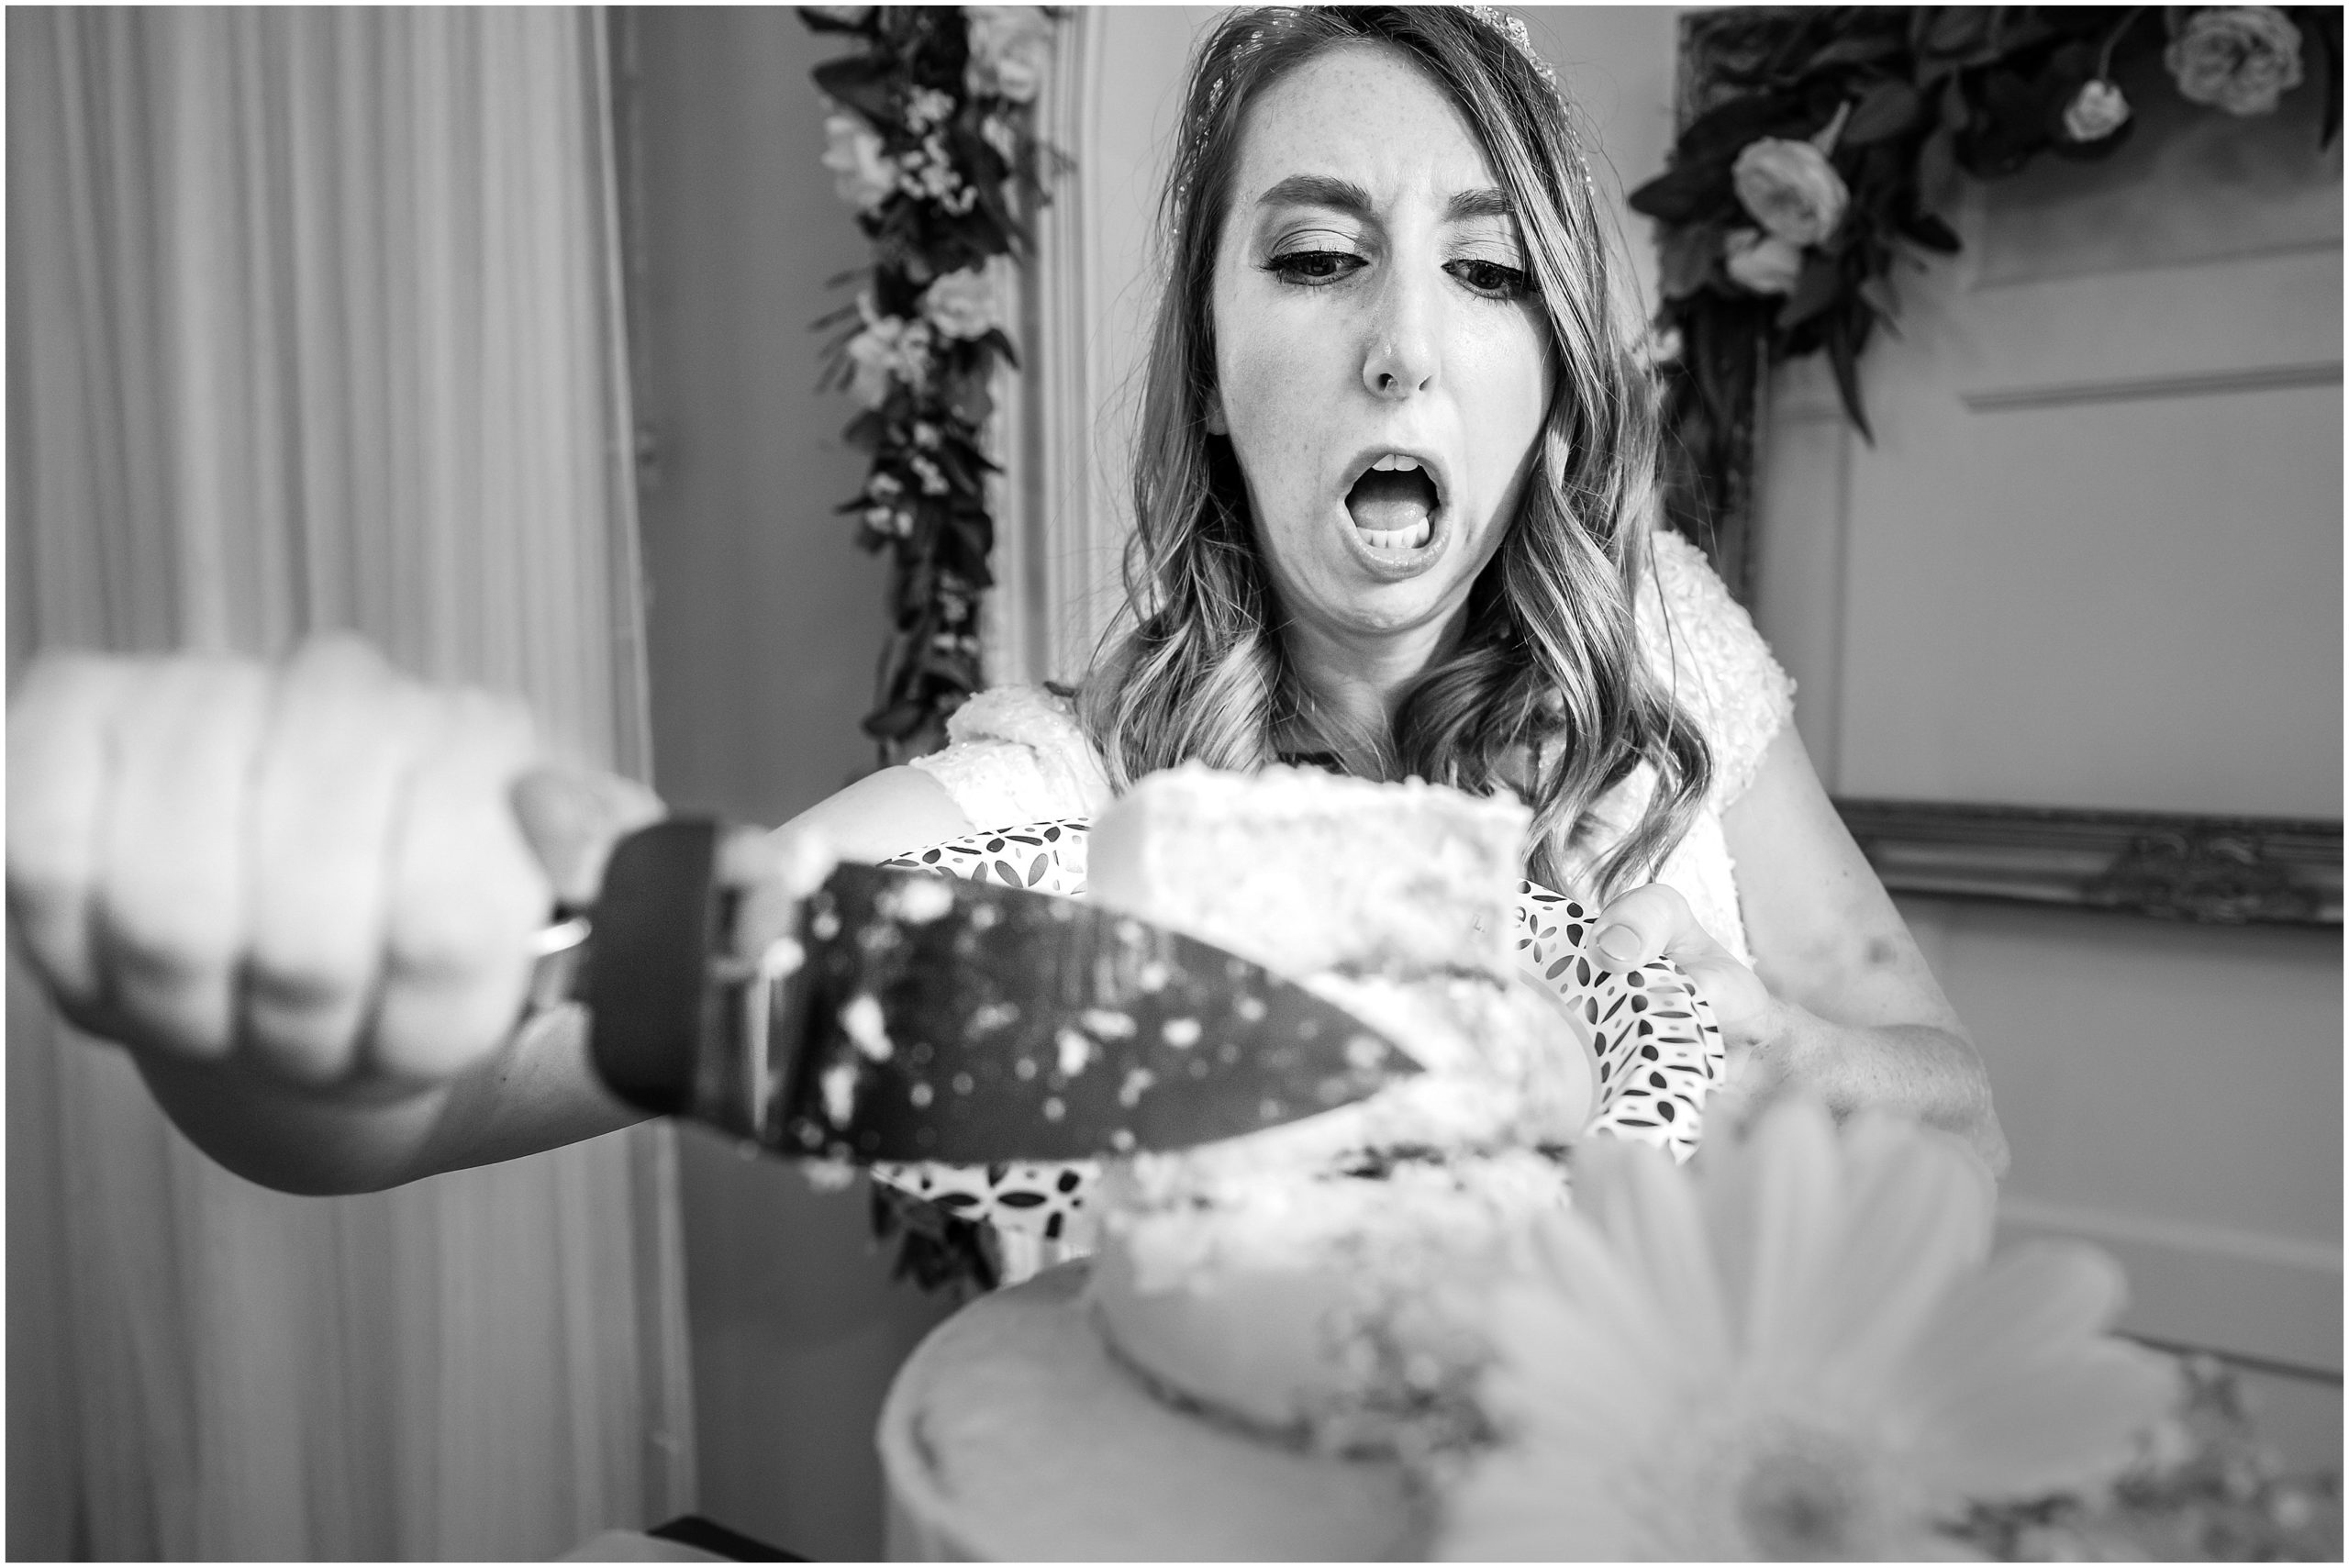 Cake cutting at reception | Payson Temple and White Willow Wedding | Jessie and Dallin Photography